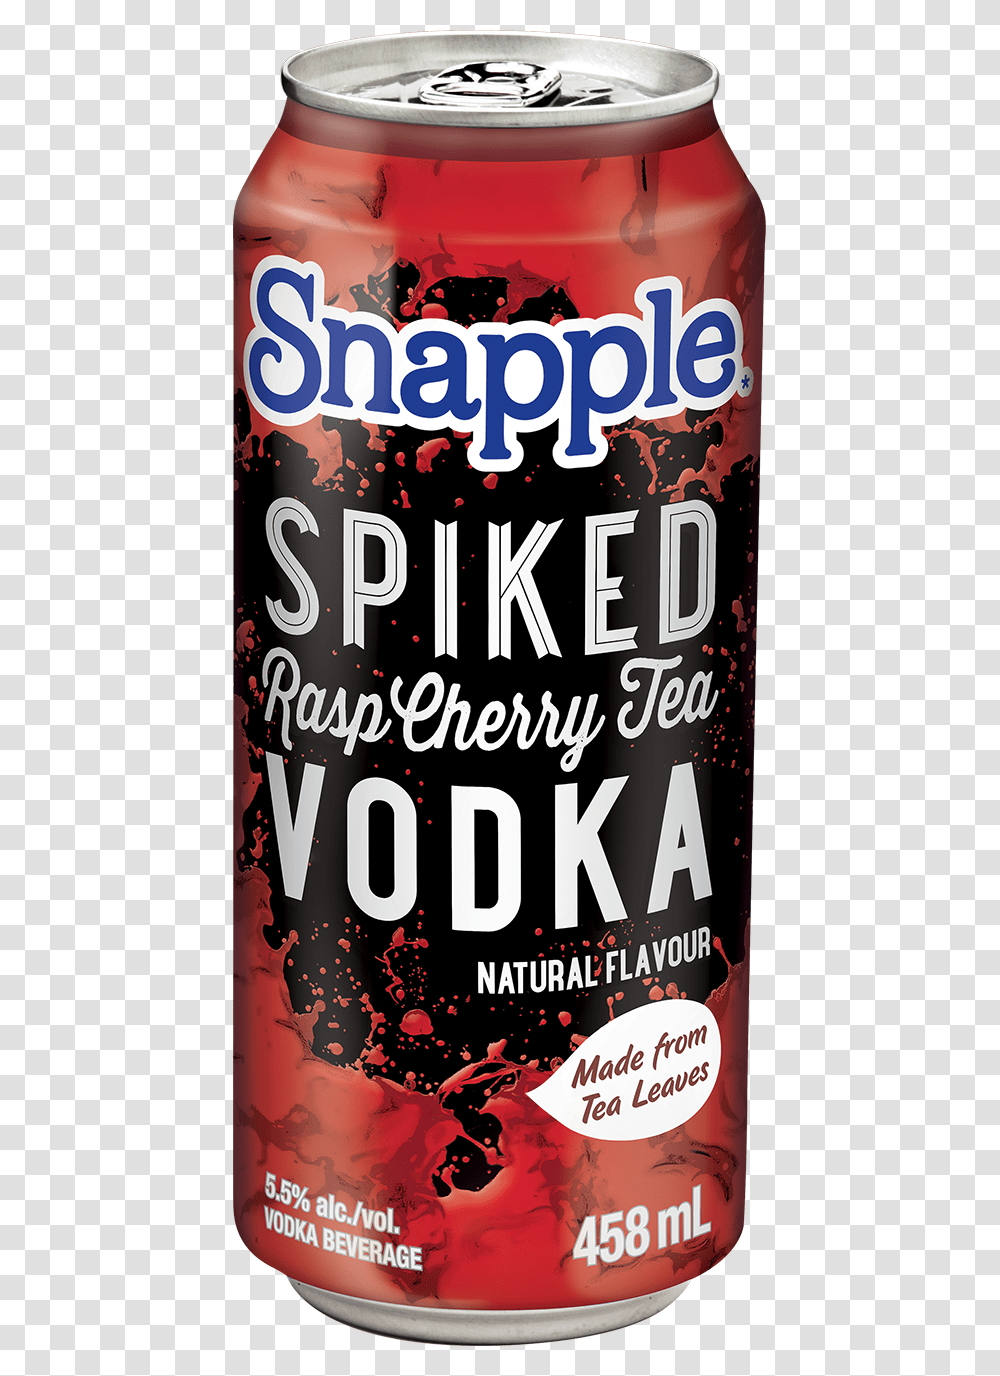 Snapple Spiked Rasp Cherry Tea Poster, Beverage, Alcohol, Advertisement Transparent Png